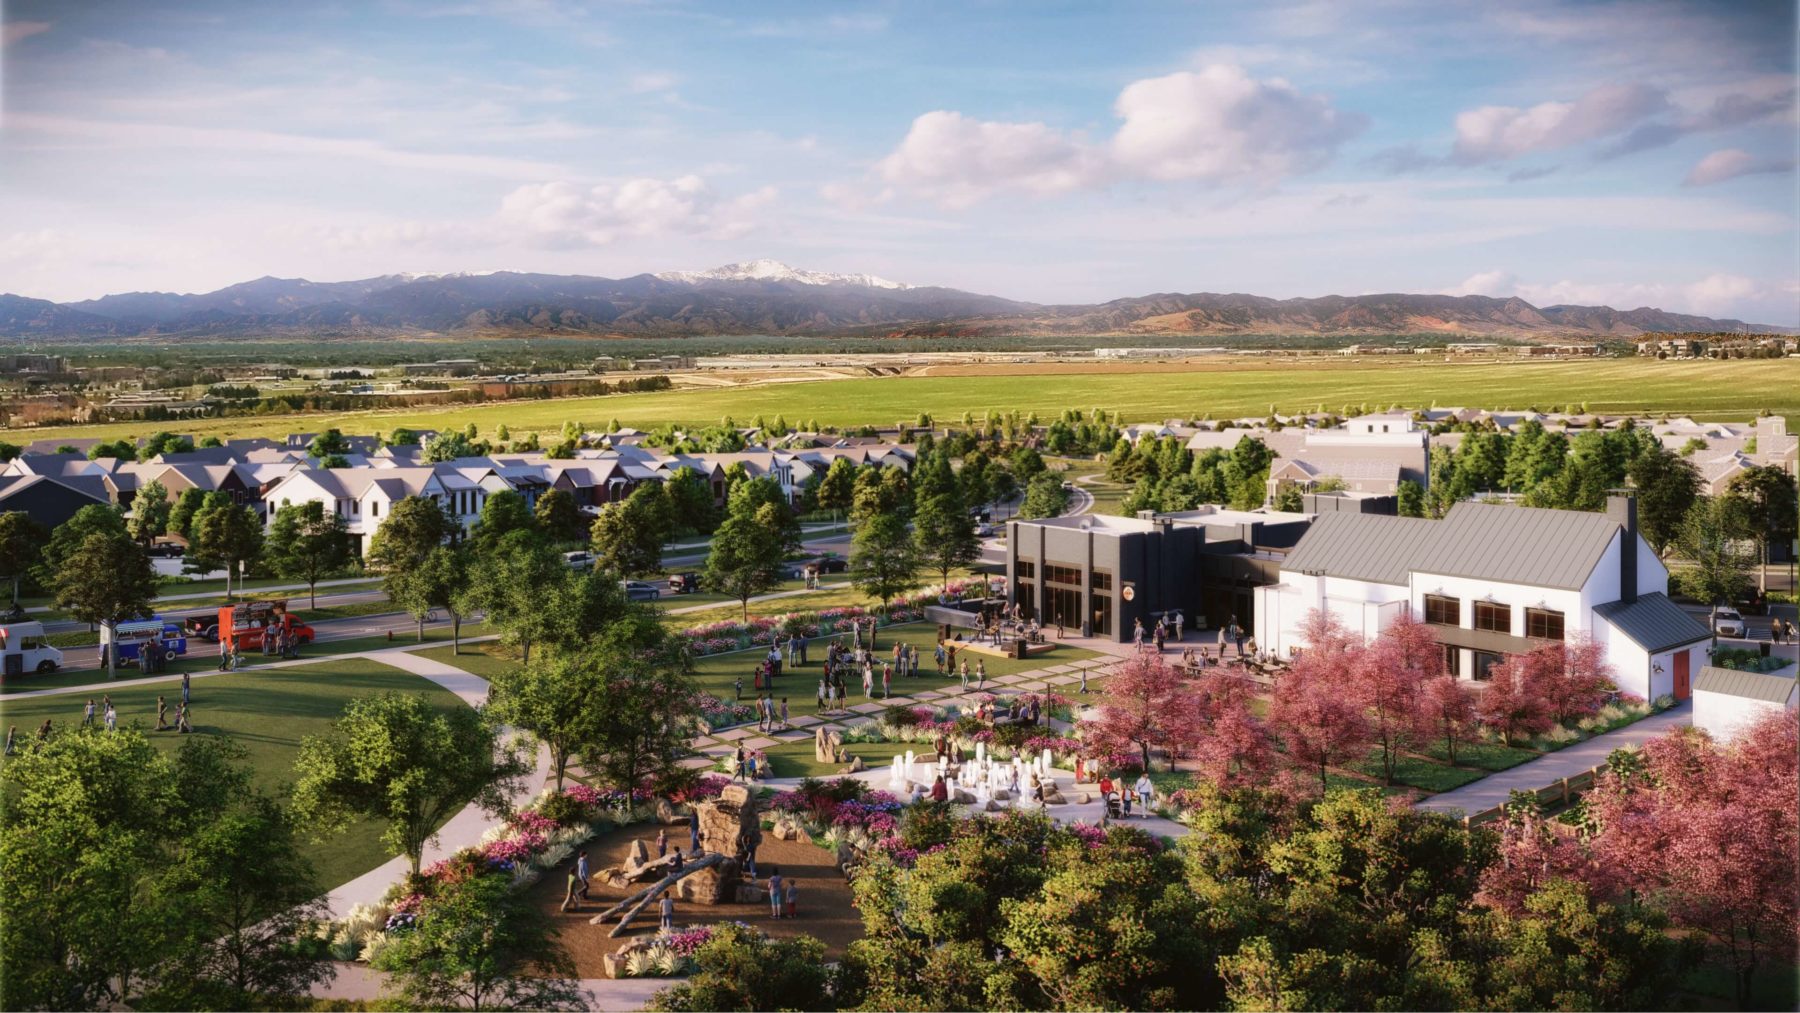 Exterior rendering of the community's welcome center, Kinston Hub, showing the future event lawn, splash pad and mountain views in the background